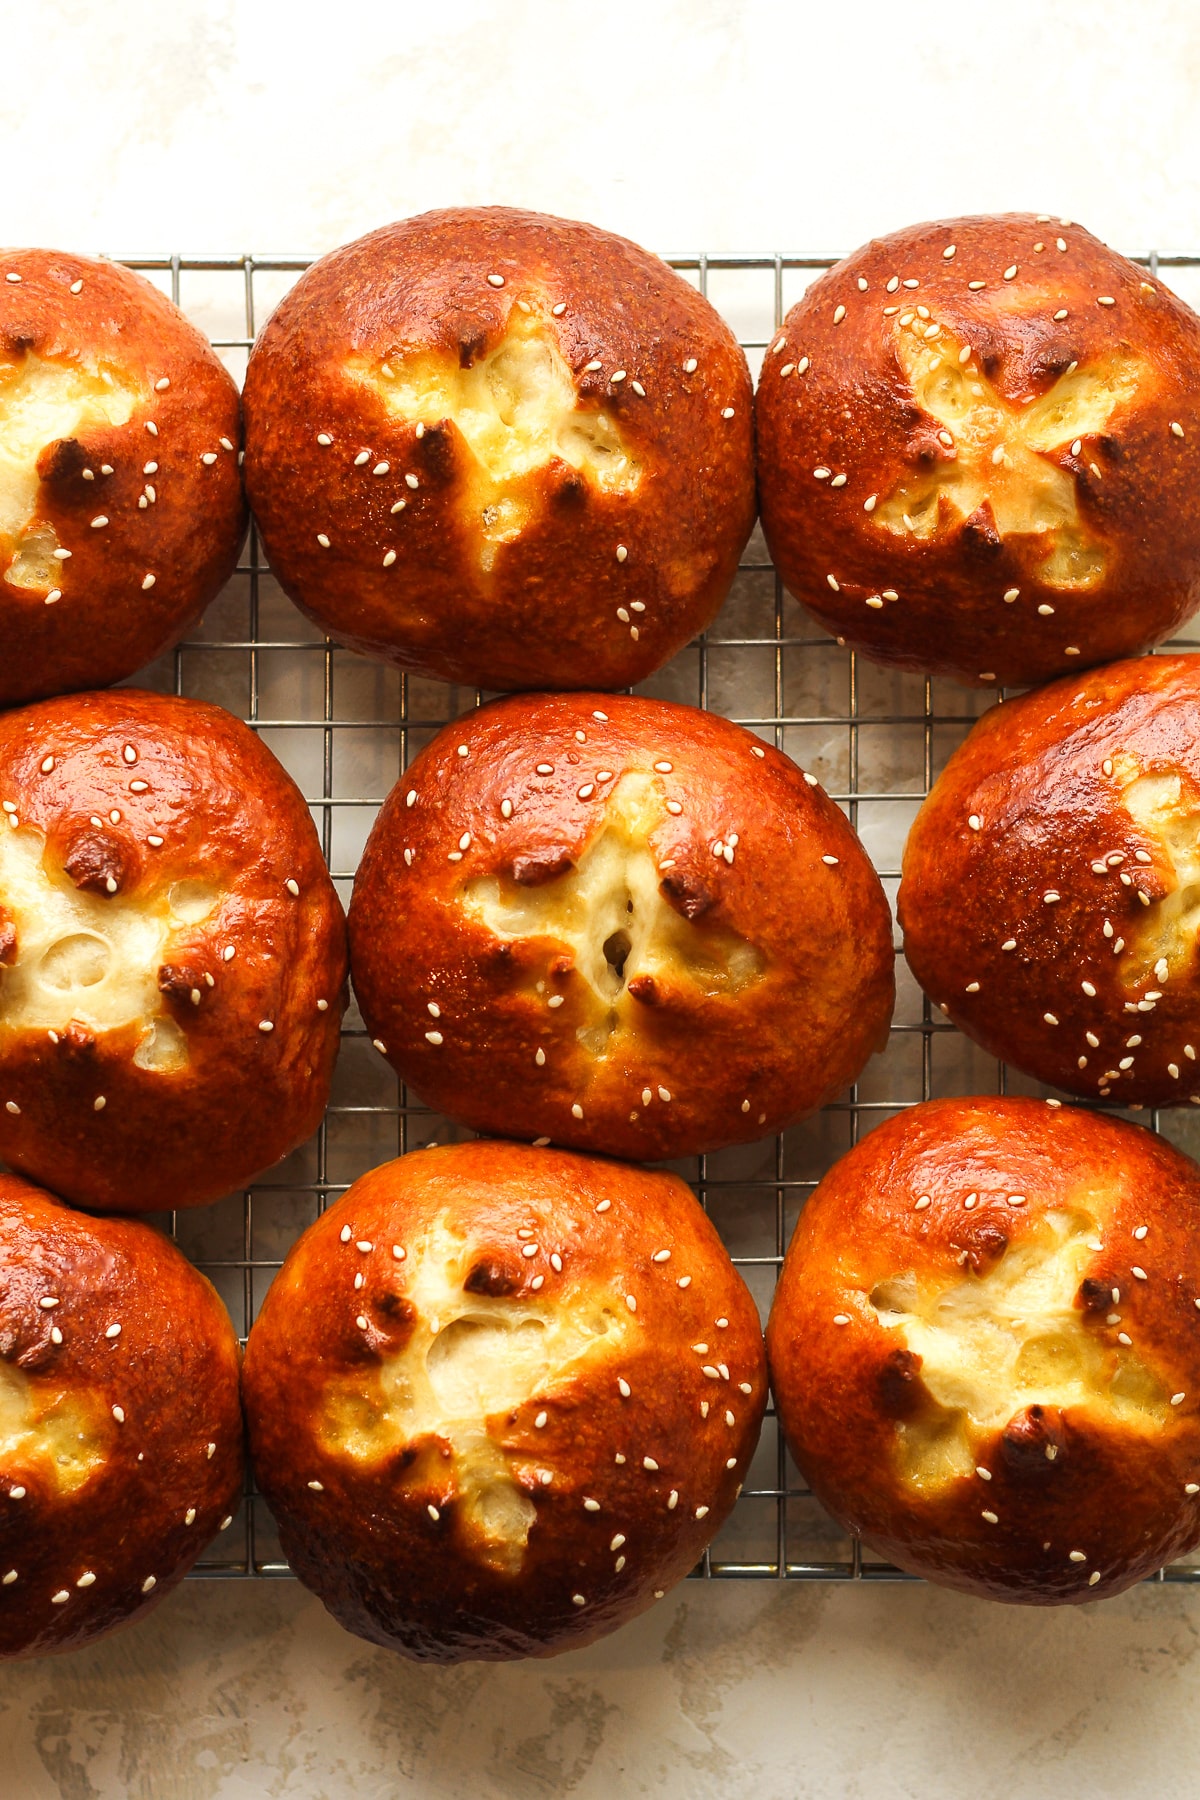 A wire rack with pretzel buns cooling.